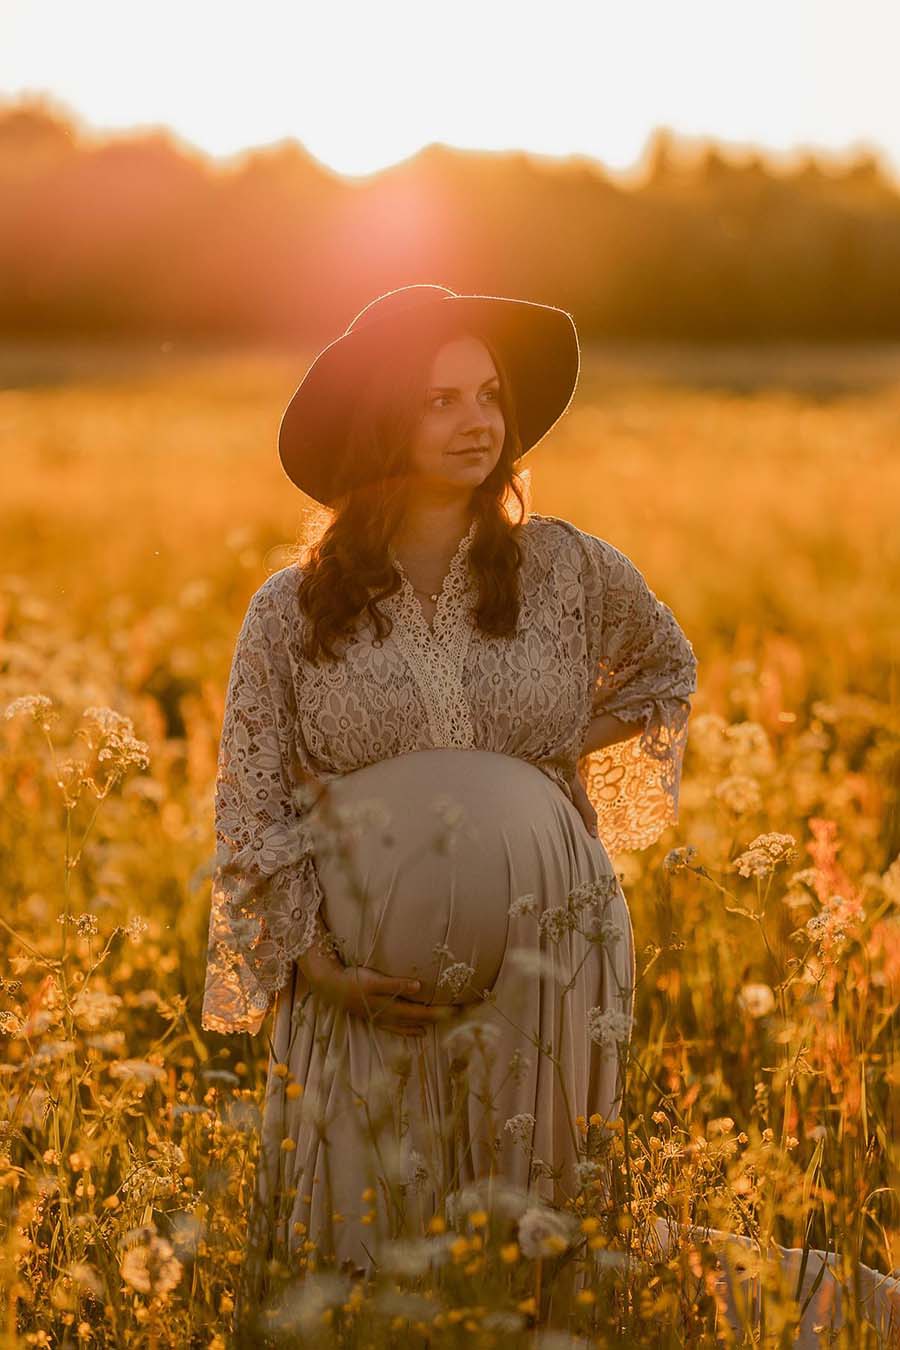 pregnant model poses outdoors during the golden hour wearing a boho style dress made of lace and jersey in sand color. she has a hat to match the western chic style.